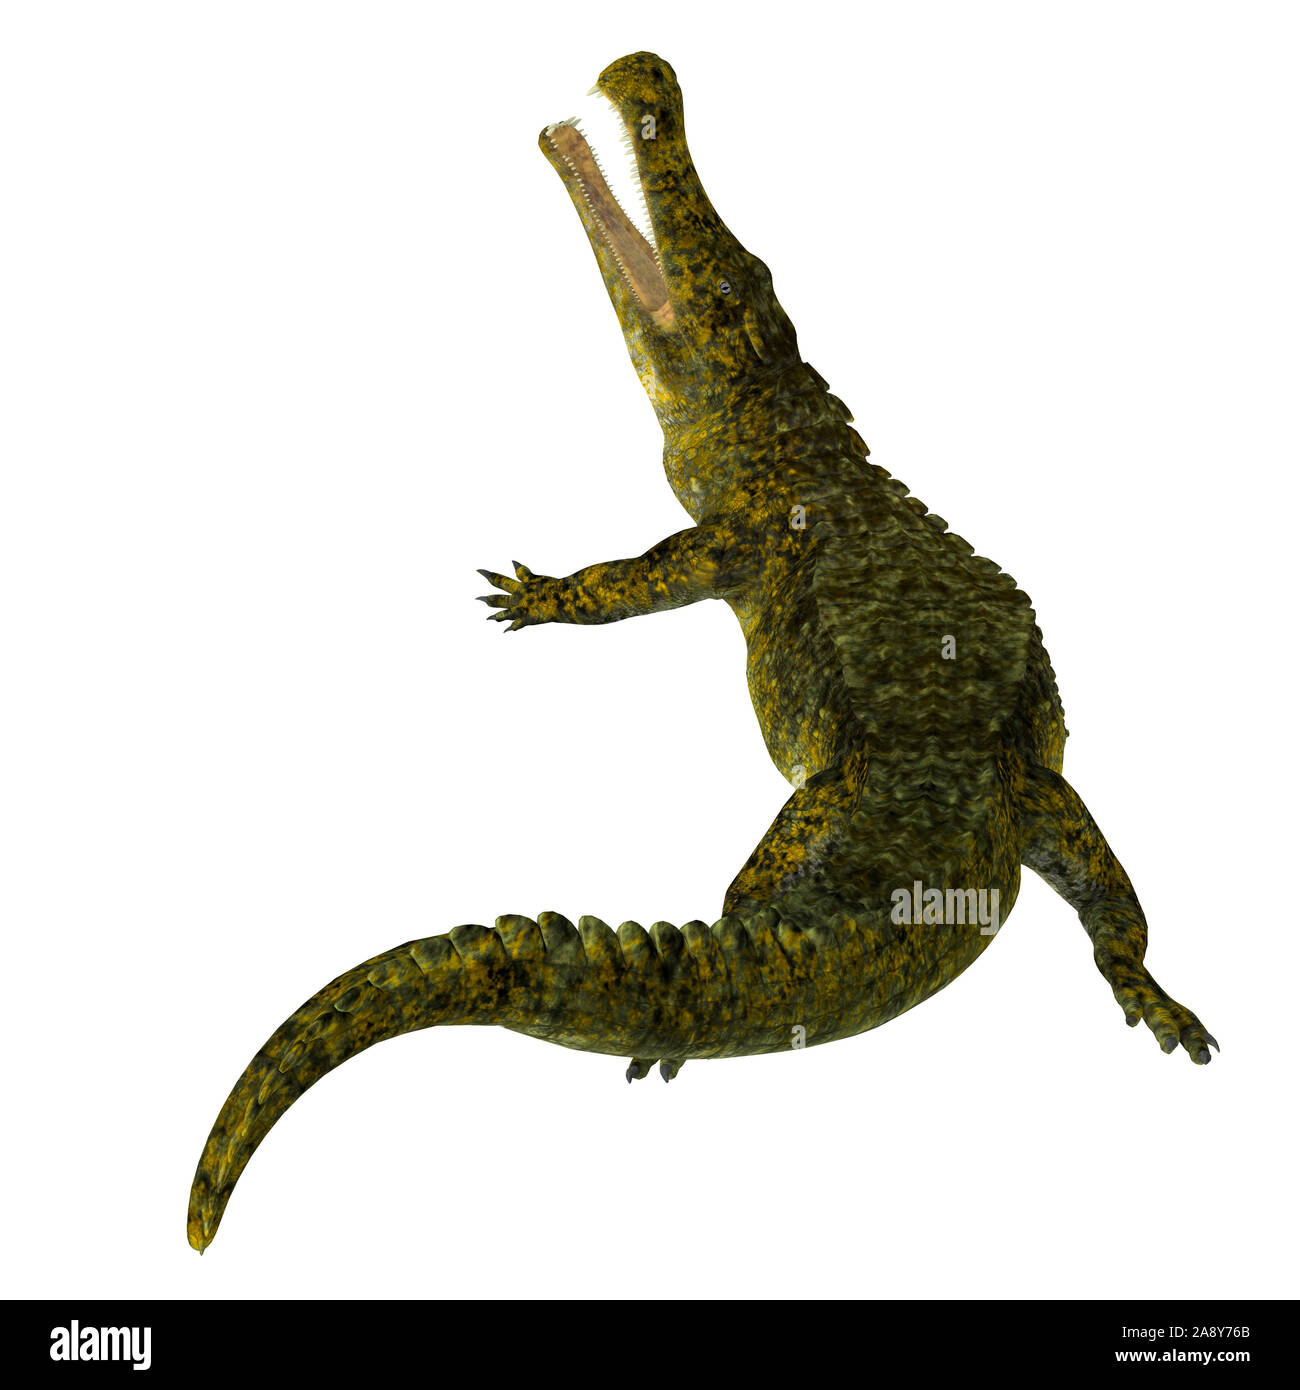 Sarcosuchus was a carnivorous aquatic crocodile that lived in Africa during the Cretaceous Period. Stock Photo